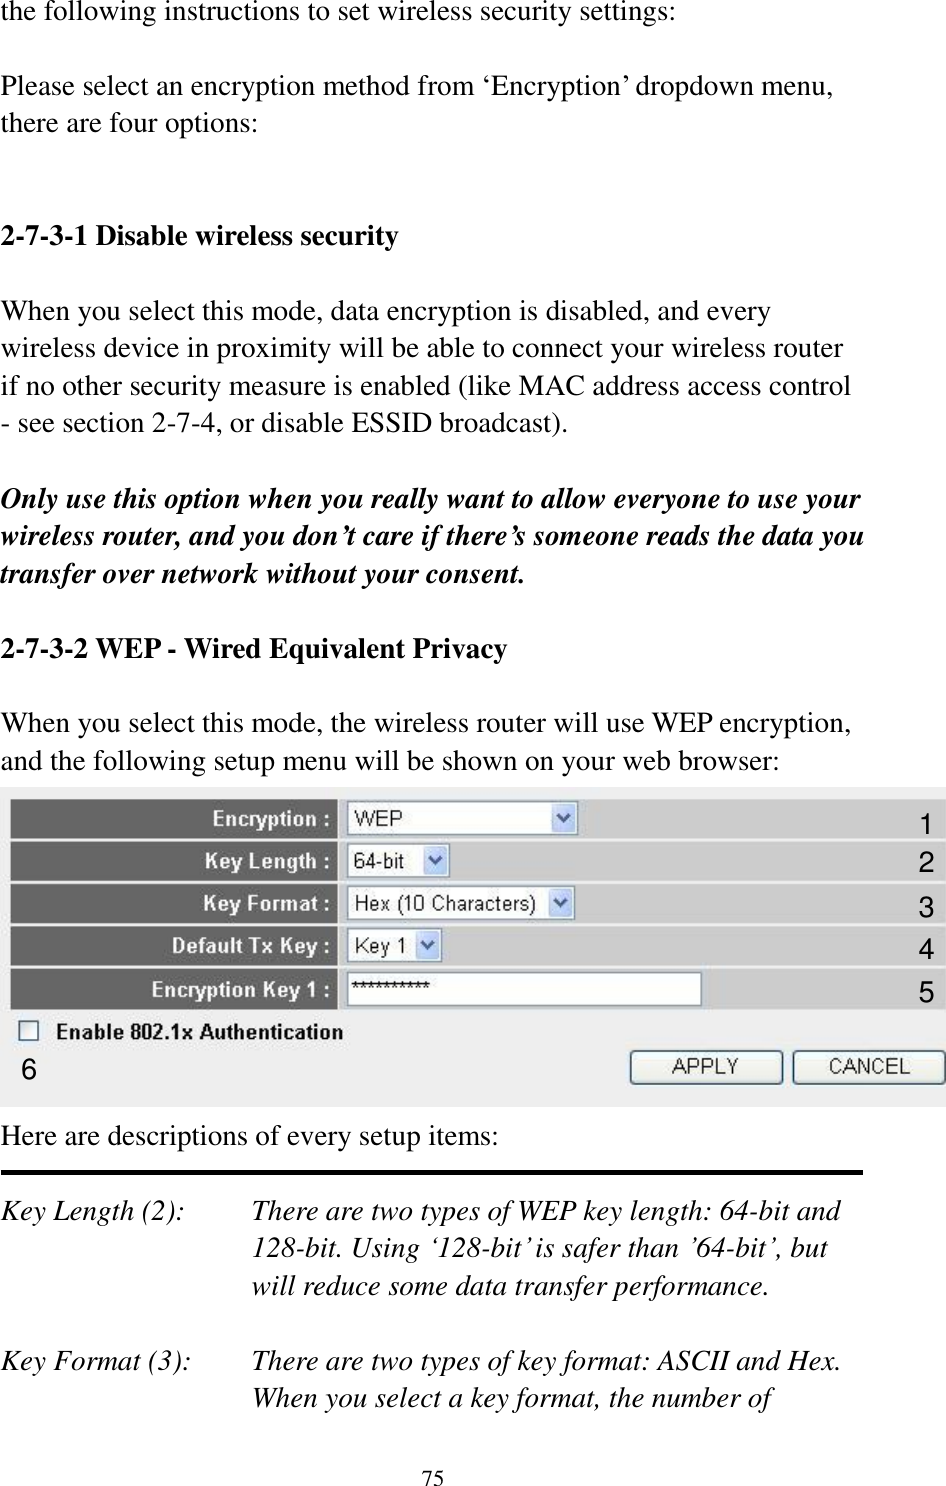 75 the following instructions to set wireless security settings:  Please select an encryption method from ‘Encryption’ dropdown menu, there are four options:   2-7-3-1 Disable wireless security  When you select this mode, data encryption is disabled, and every wireless device in proximity will be able to connect your wireless router if no other security measure is enabled (like MAC address access control - see section 2-7-4, or disable ESSID broadcast).    Only use this option when you really want to allow everyone to use your wireless router, and you don’t care if there’s someone reads the data you transfer over network without your consent.  2-7-3-2 WEP - Wired Equivalent Privacy  When you select this mode, the wireless router will use WEP encryption, and the following setup menu will be shown on your web browser:  Here are descriptions of every setup items:  Key Length (2):    There are two types of WEP key length: 64-bit and 128-bit. Using ‘128-bit’ is safer than ’64-bit’, but will reduce some data transfer performance.  Key Format (3):    There are two types of key format: ASCII and Hex. When you select a key format, the number of 1 2 3 5 6 4 